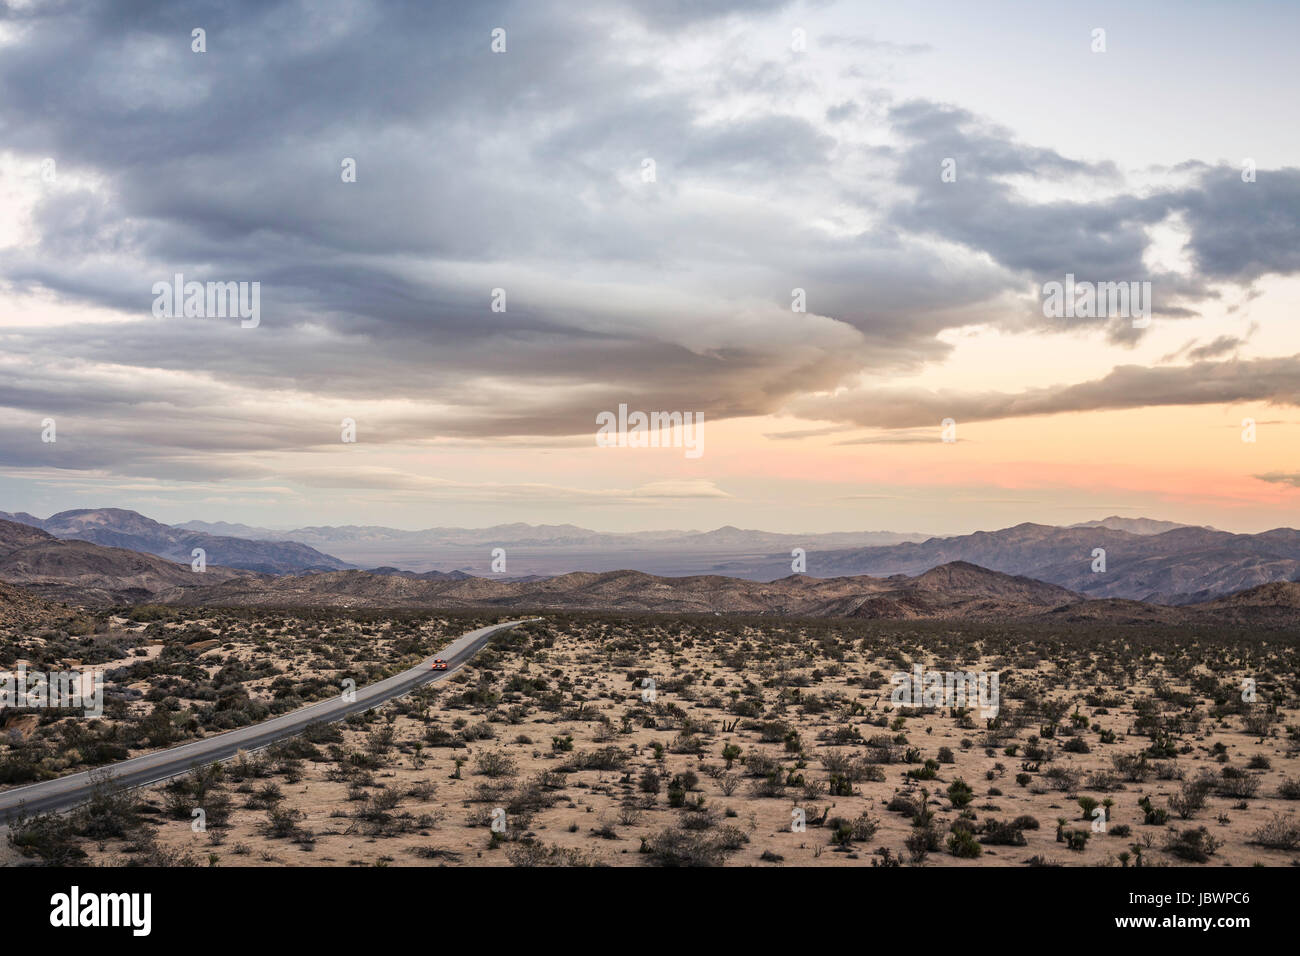 Landscape view of distant highway in Joshua Tree National Park at dusk, California, USA Stock Photo